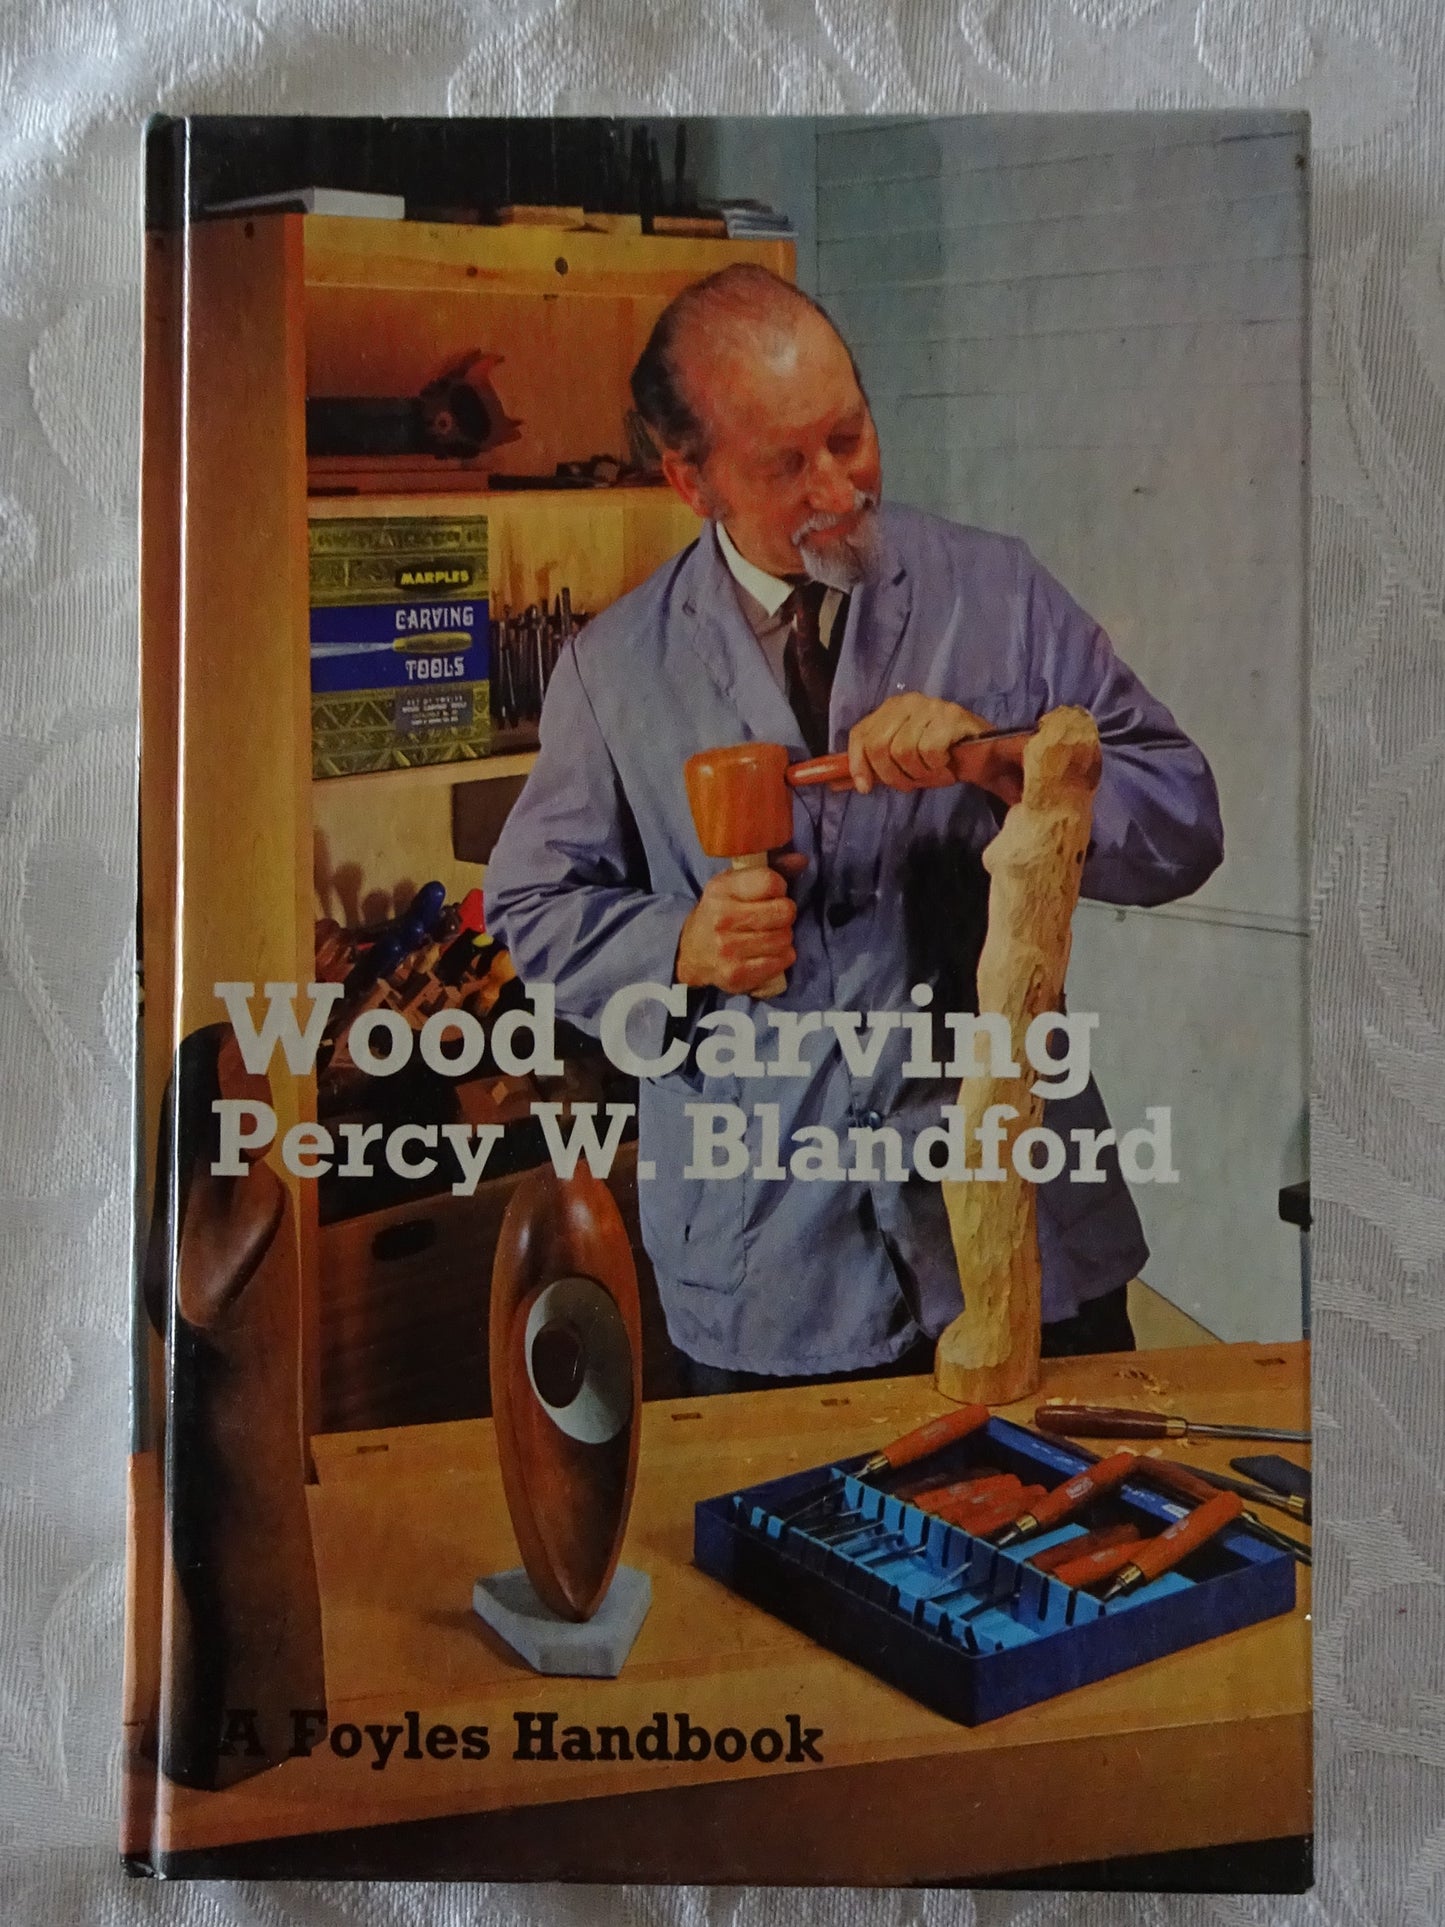 Wood Carving by Percy W. Blandford